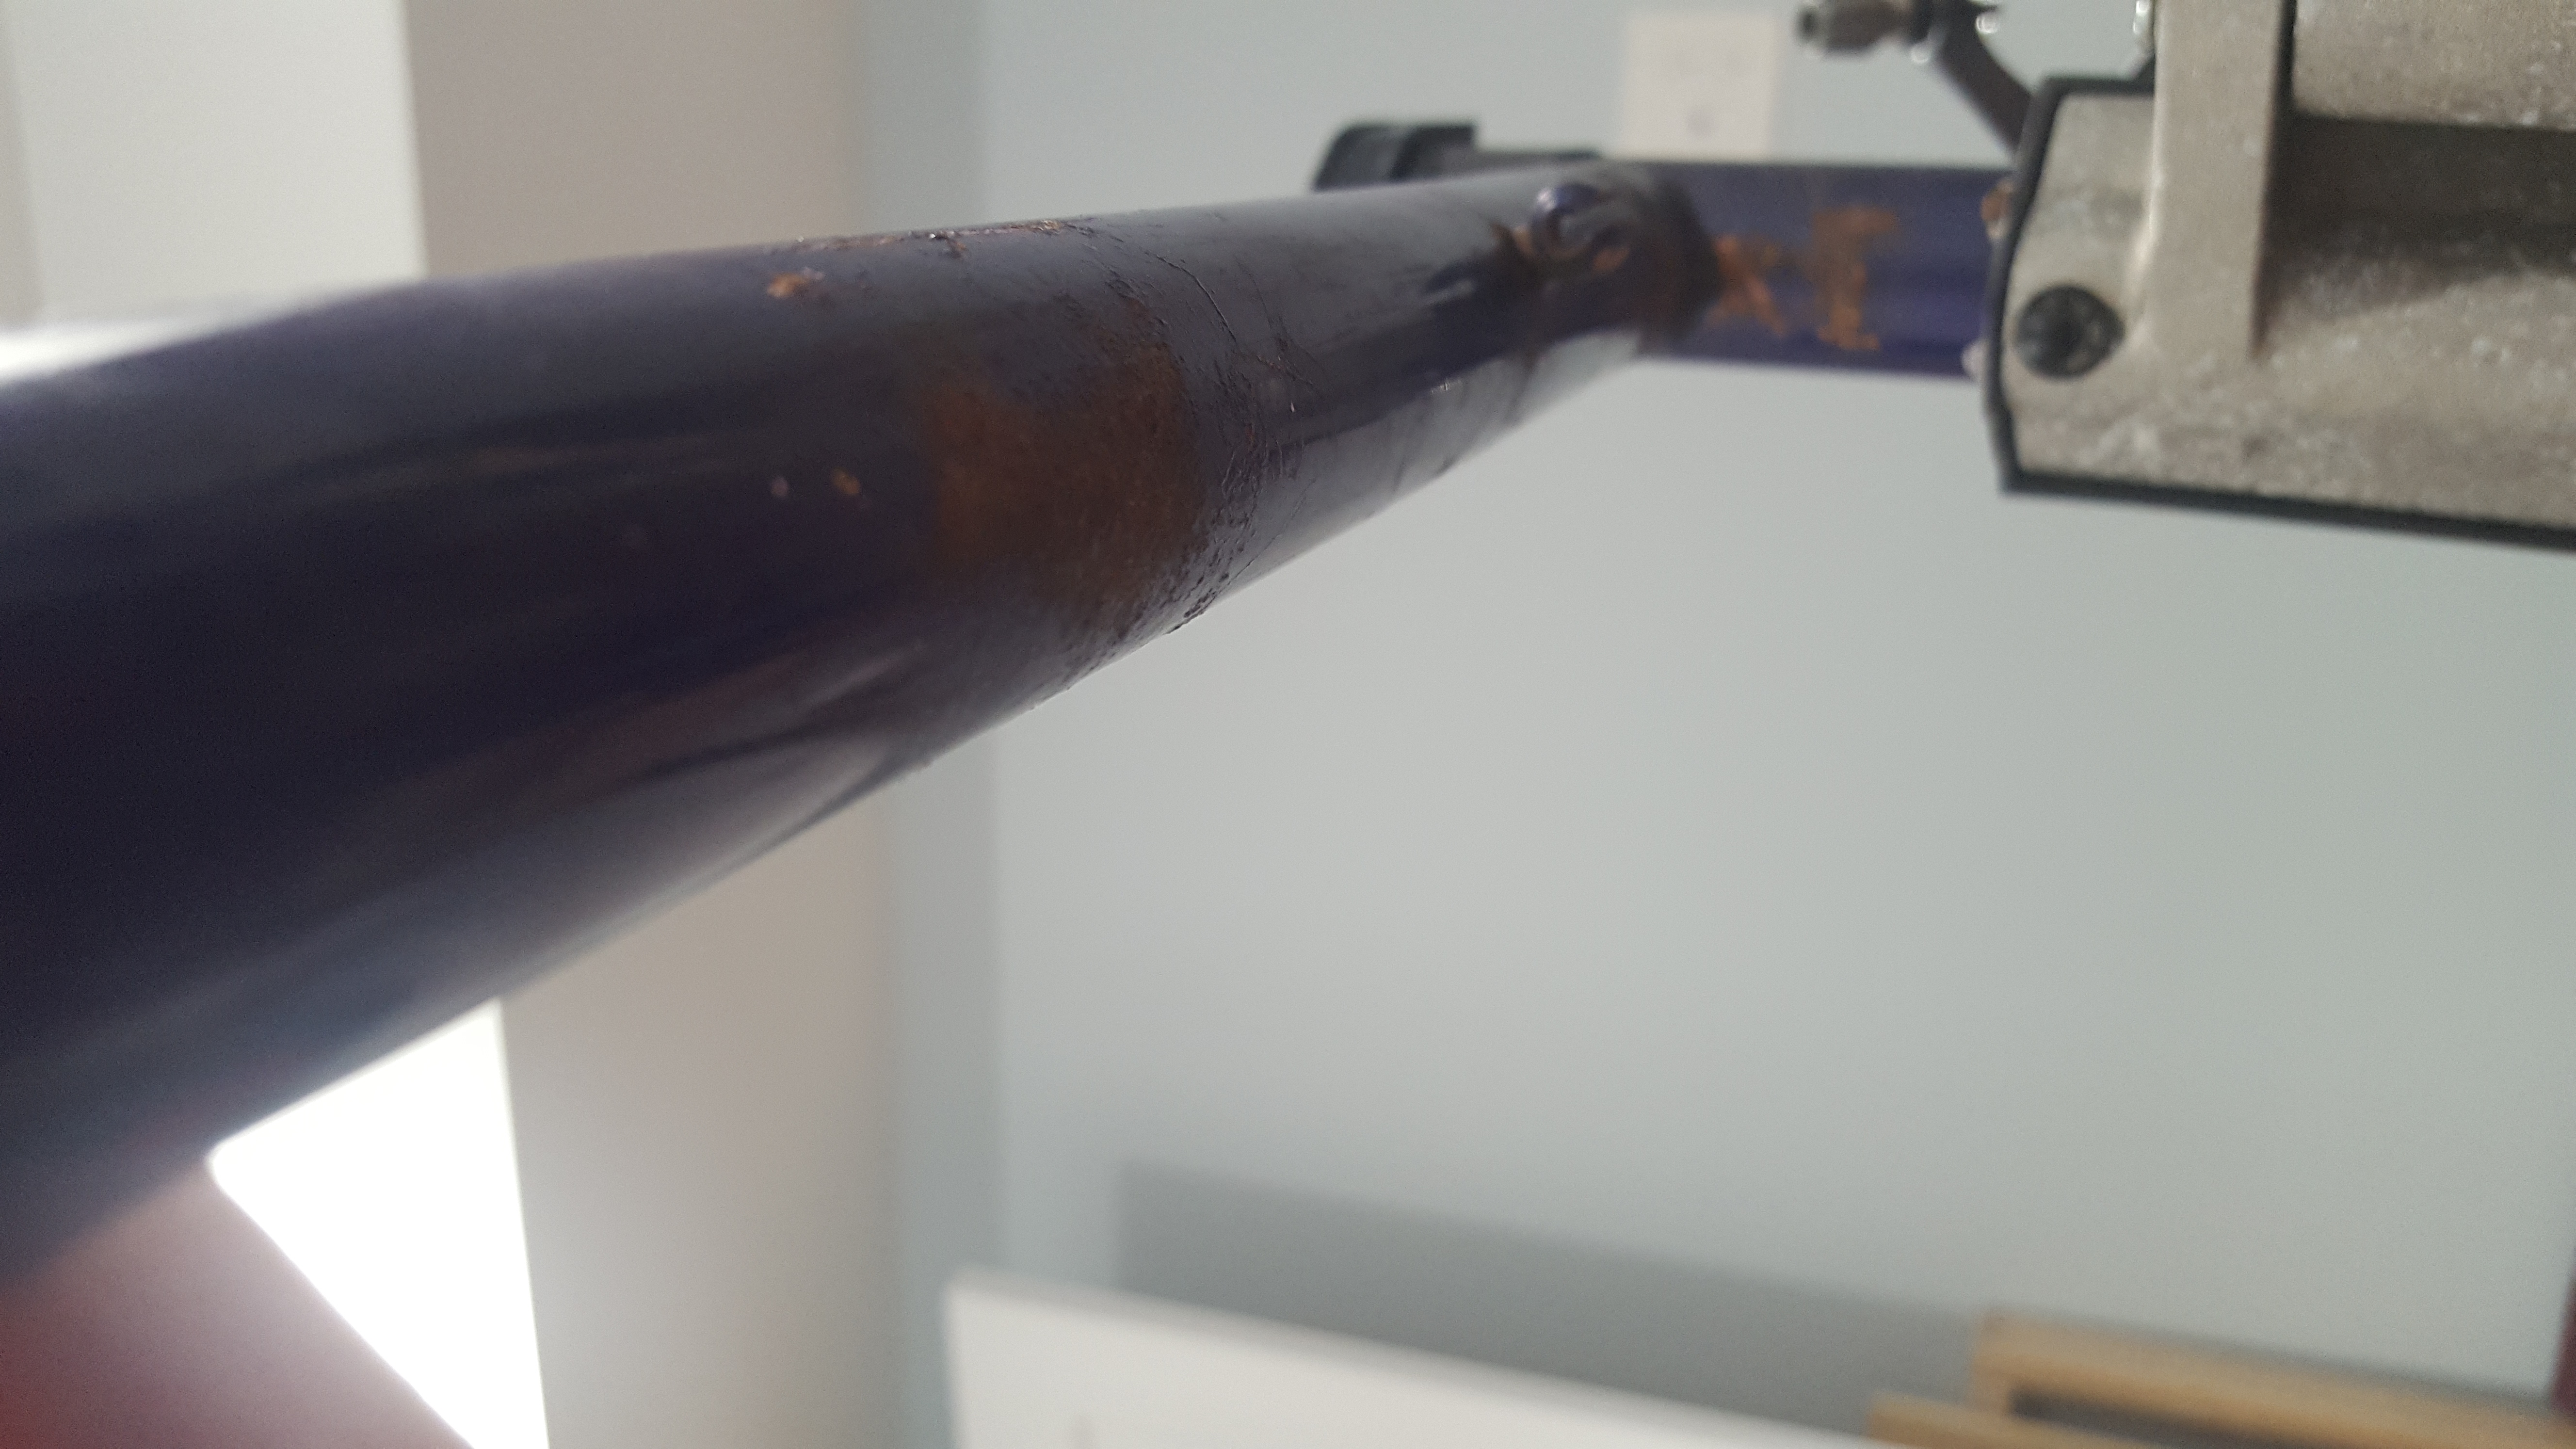 A close up on the bicycle frame's top tube showing the joint with the seat tube. The seat tube is in the clamp of a bike stand. Rust is visible on the top tube and around the joint. In the background is a wall and ceiling.